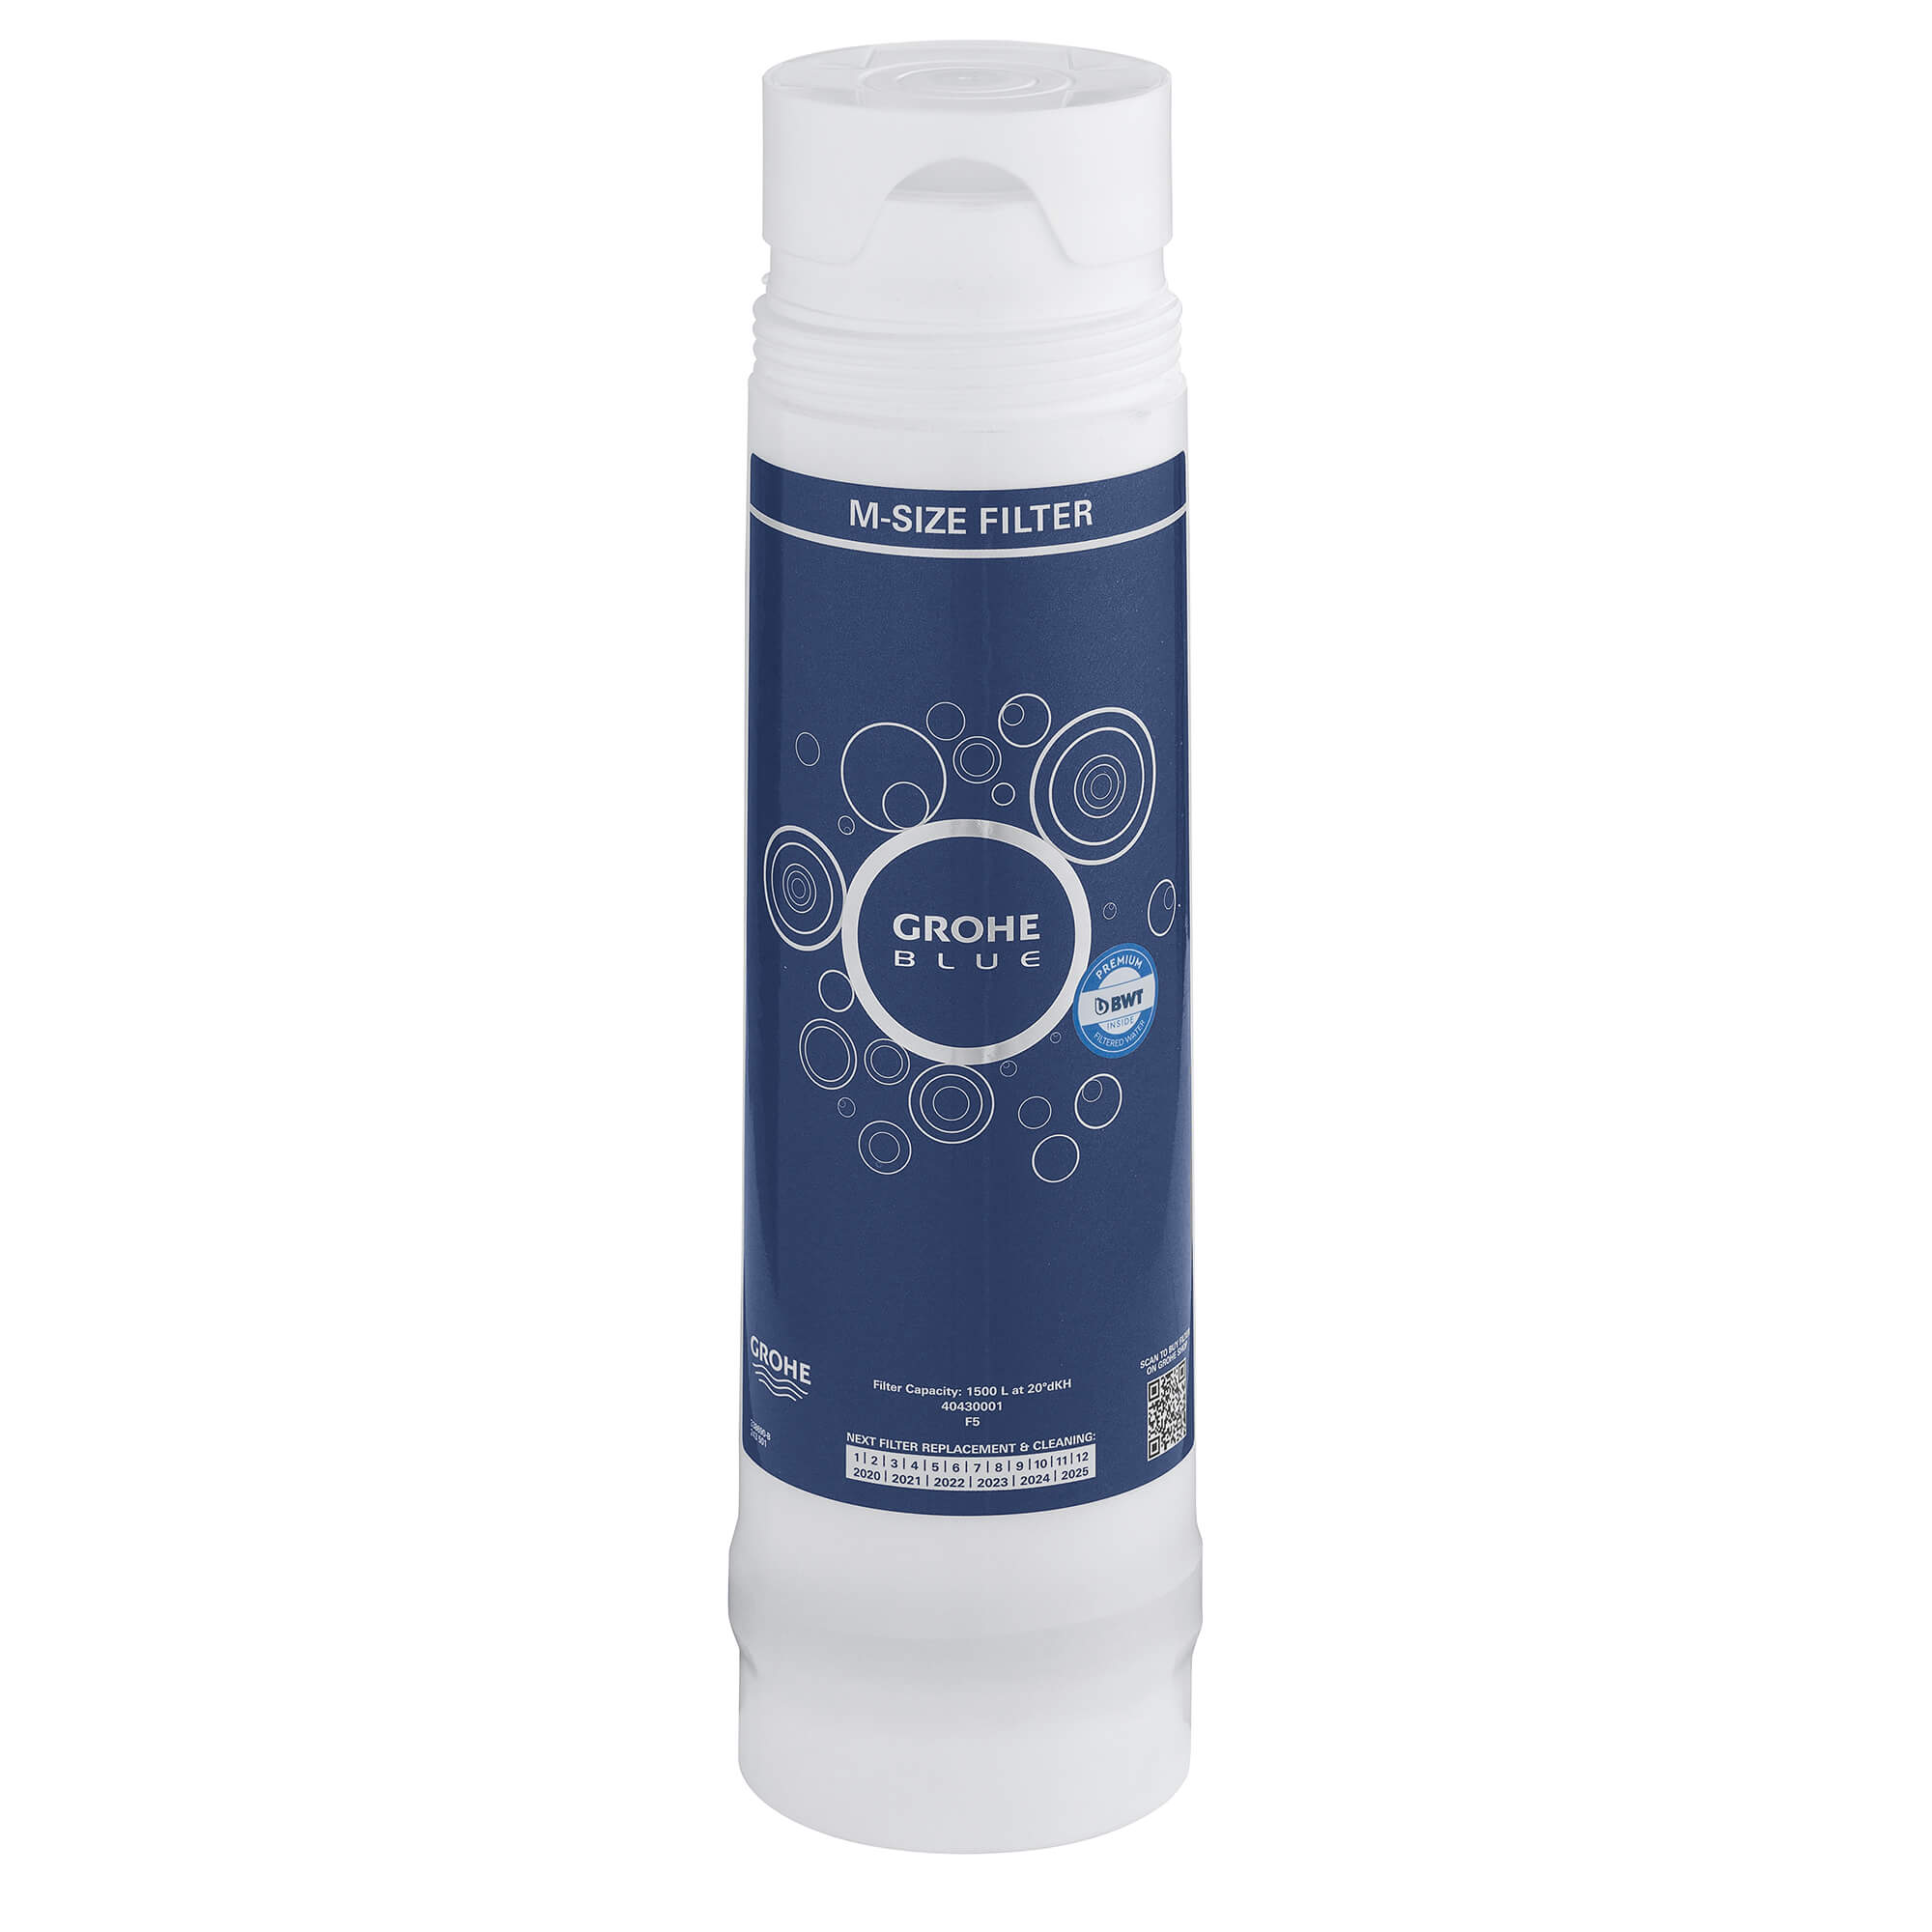 GROHE Blue® Filter M-Size